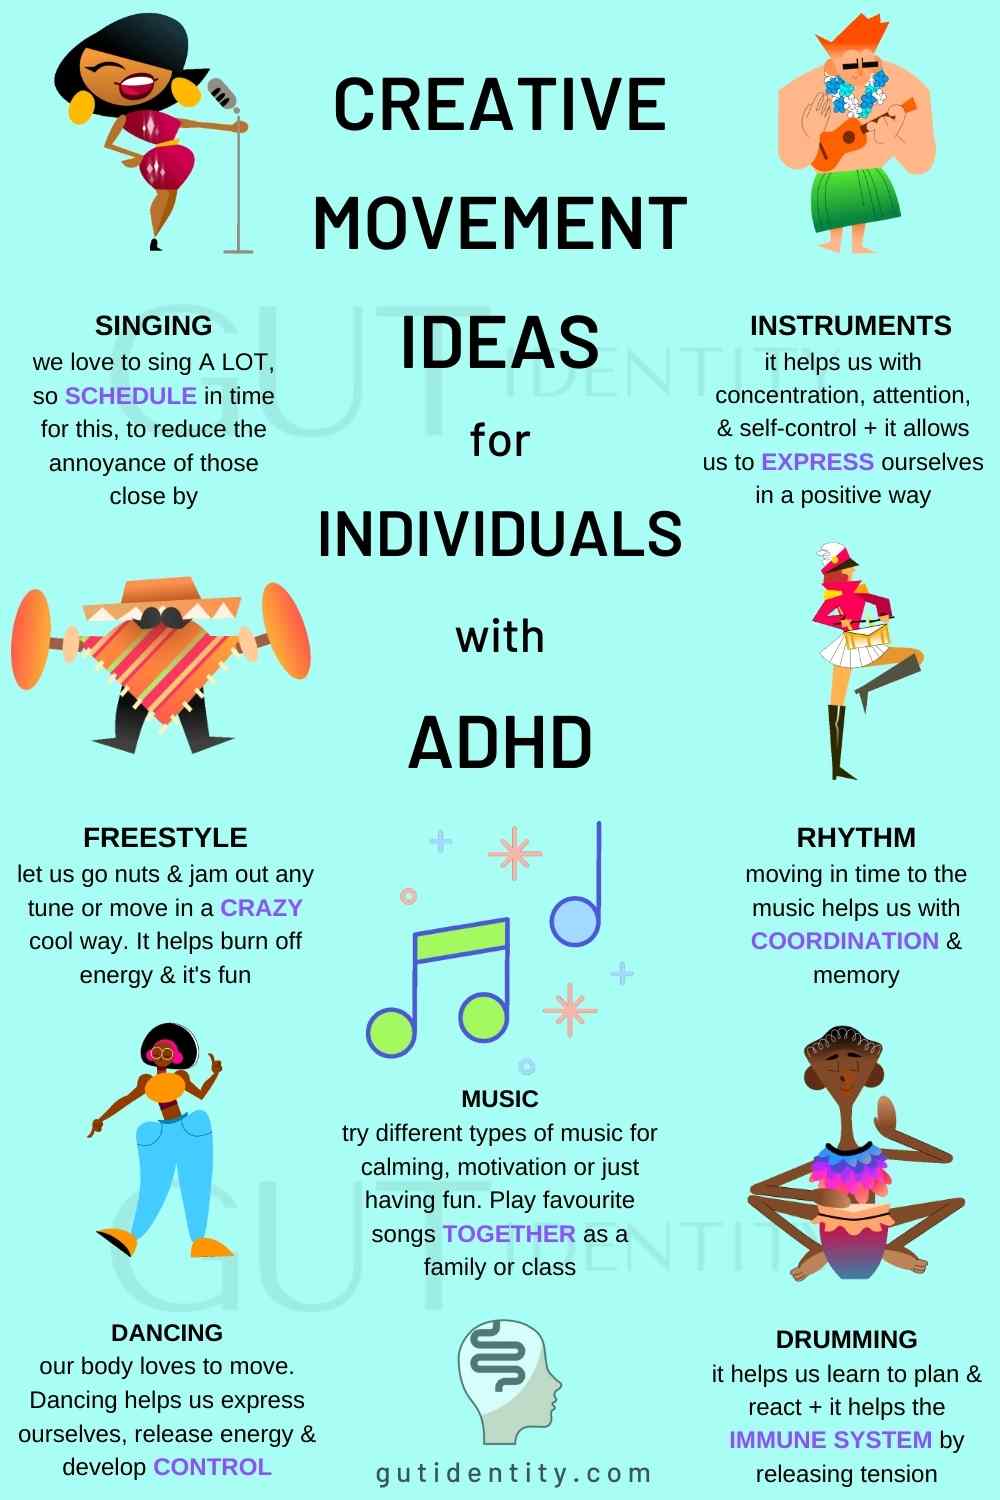 Creative Movement Ideas for Individuals with ADHD by Gutidentity